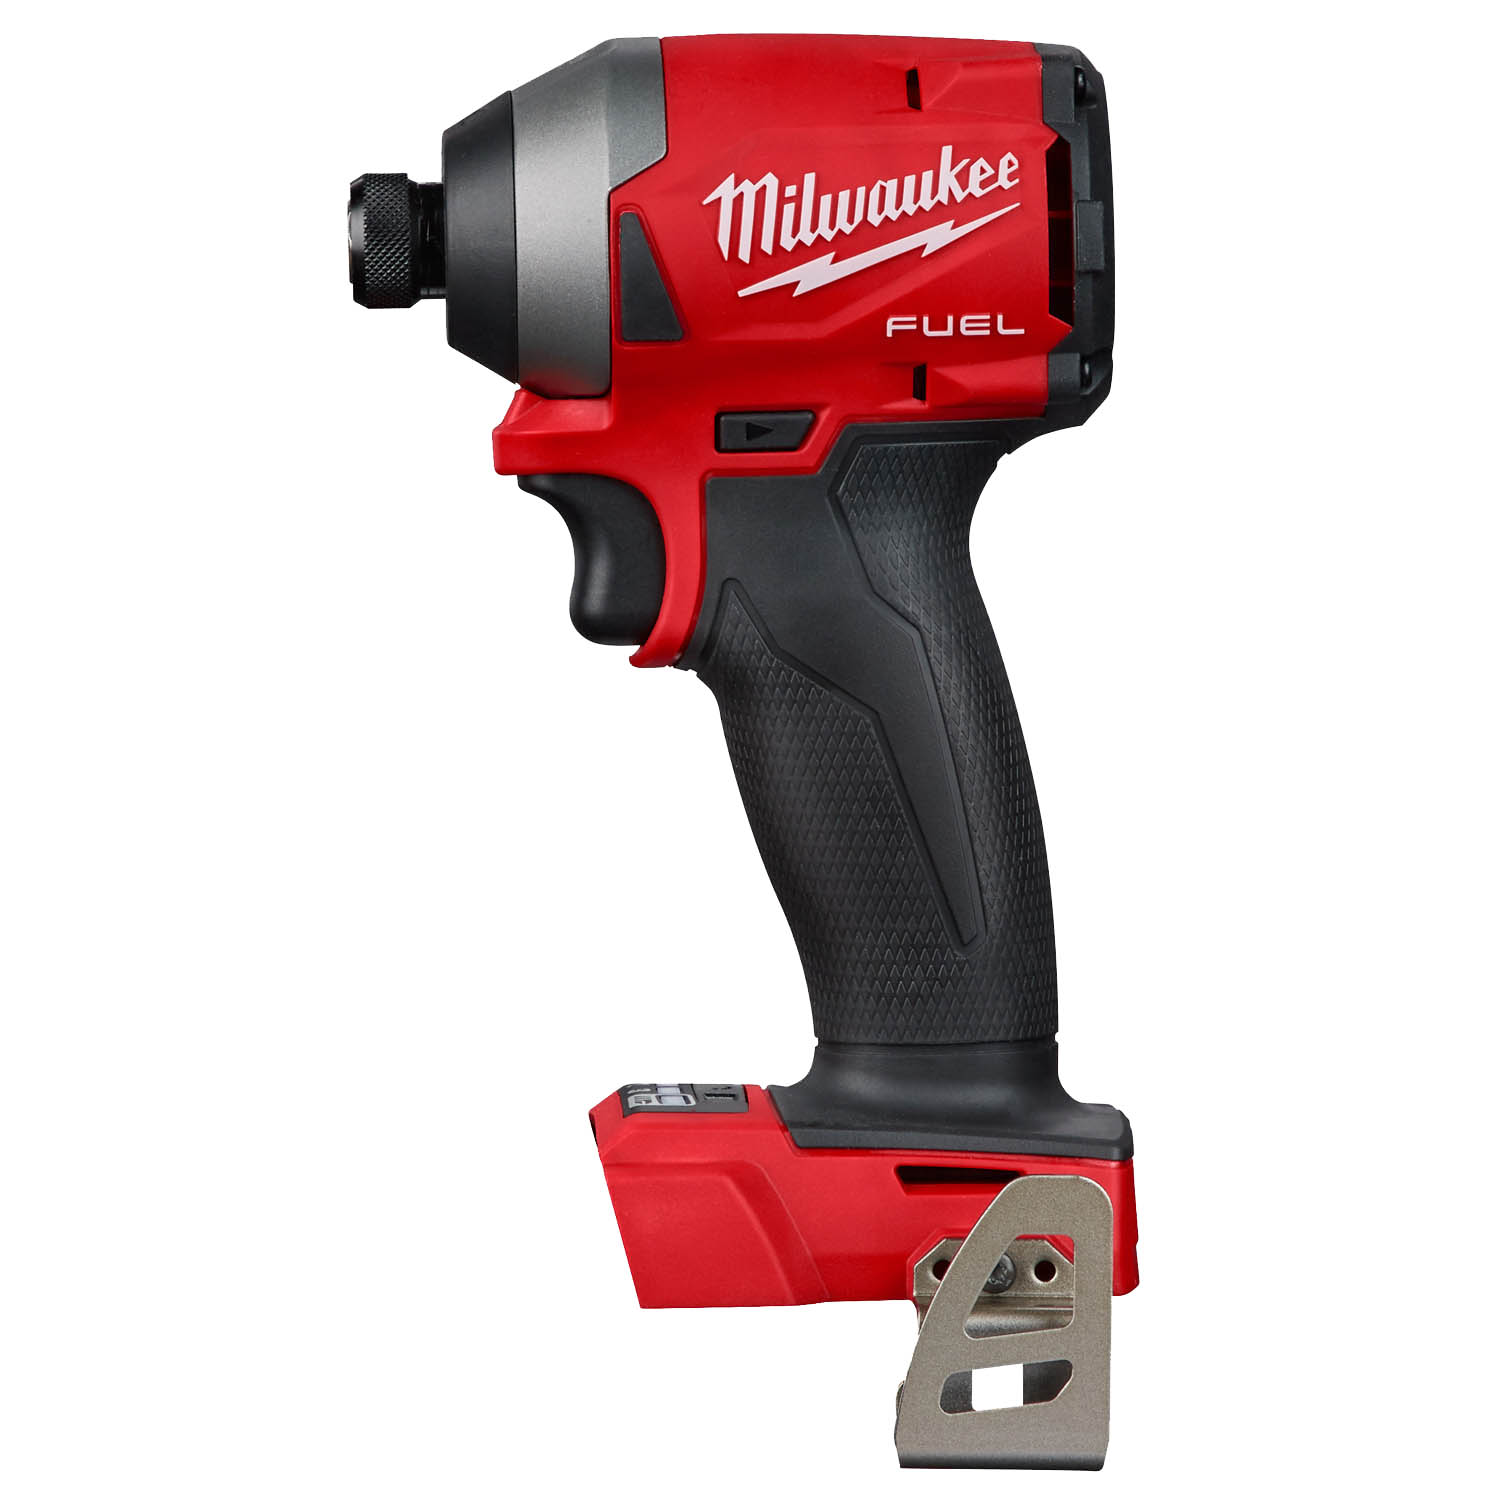 M18 FUEL 1/4 IN. HEX IMPACT DRIVER (TOOL ONLY)